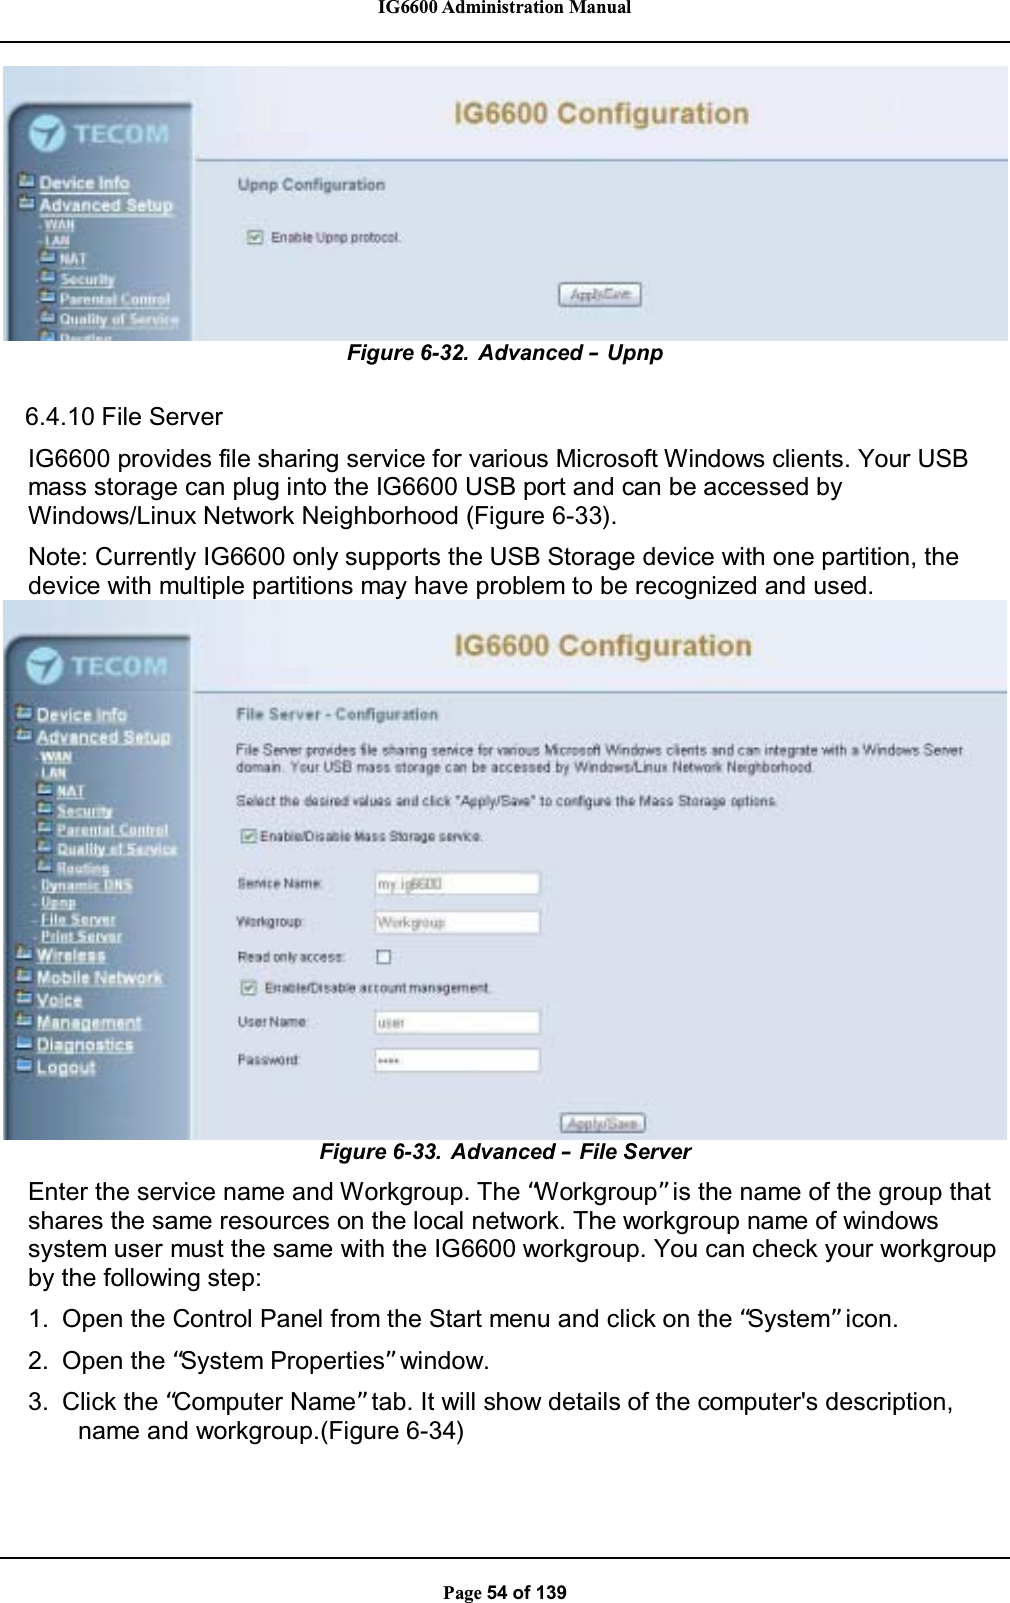 IG6600 Administration ManualPage 54 of 139Figure 6-32. Advanced –Upnp6.4.10 File ServerIG6600 provides file sharing service for various Microsoft Windows clients. Your USBmass storage can plug into the IG6600 USB port and can be accessed byWindows/Linux Network Neighborhood (Figure 6-33).Note: Currently IG6600 only supports the USB Storage device with one partition, thedevice with multiple partitions may have problem to be recognized and used.Figure 6-33. Advanced –File ServerEnter the service name and Workgroup. The “Workgroup”is the name of the group thatshares the same resources on the local network. The workgroup name of windowssystem user must the same with the IG6600 workgroup. You can check your workgroupby the following step:1. Open the Control Panel from the Start menu and click on the “System”icon.2. Open the “System Properties”window.3. Click the “Computer Name” tab. It will show details of the computer&apos;s description,name and workgroup.(Figure 6-34)